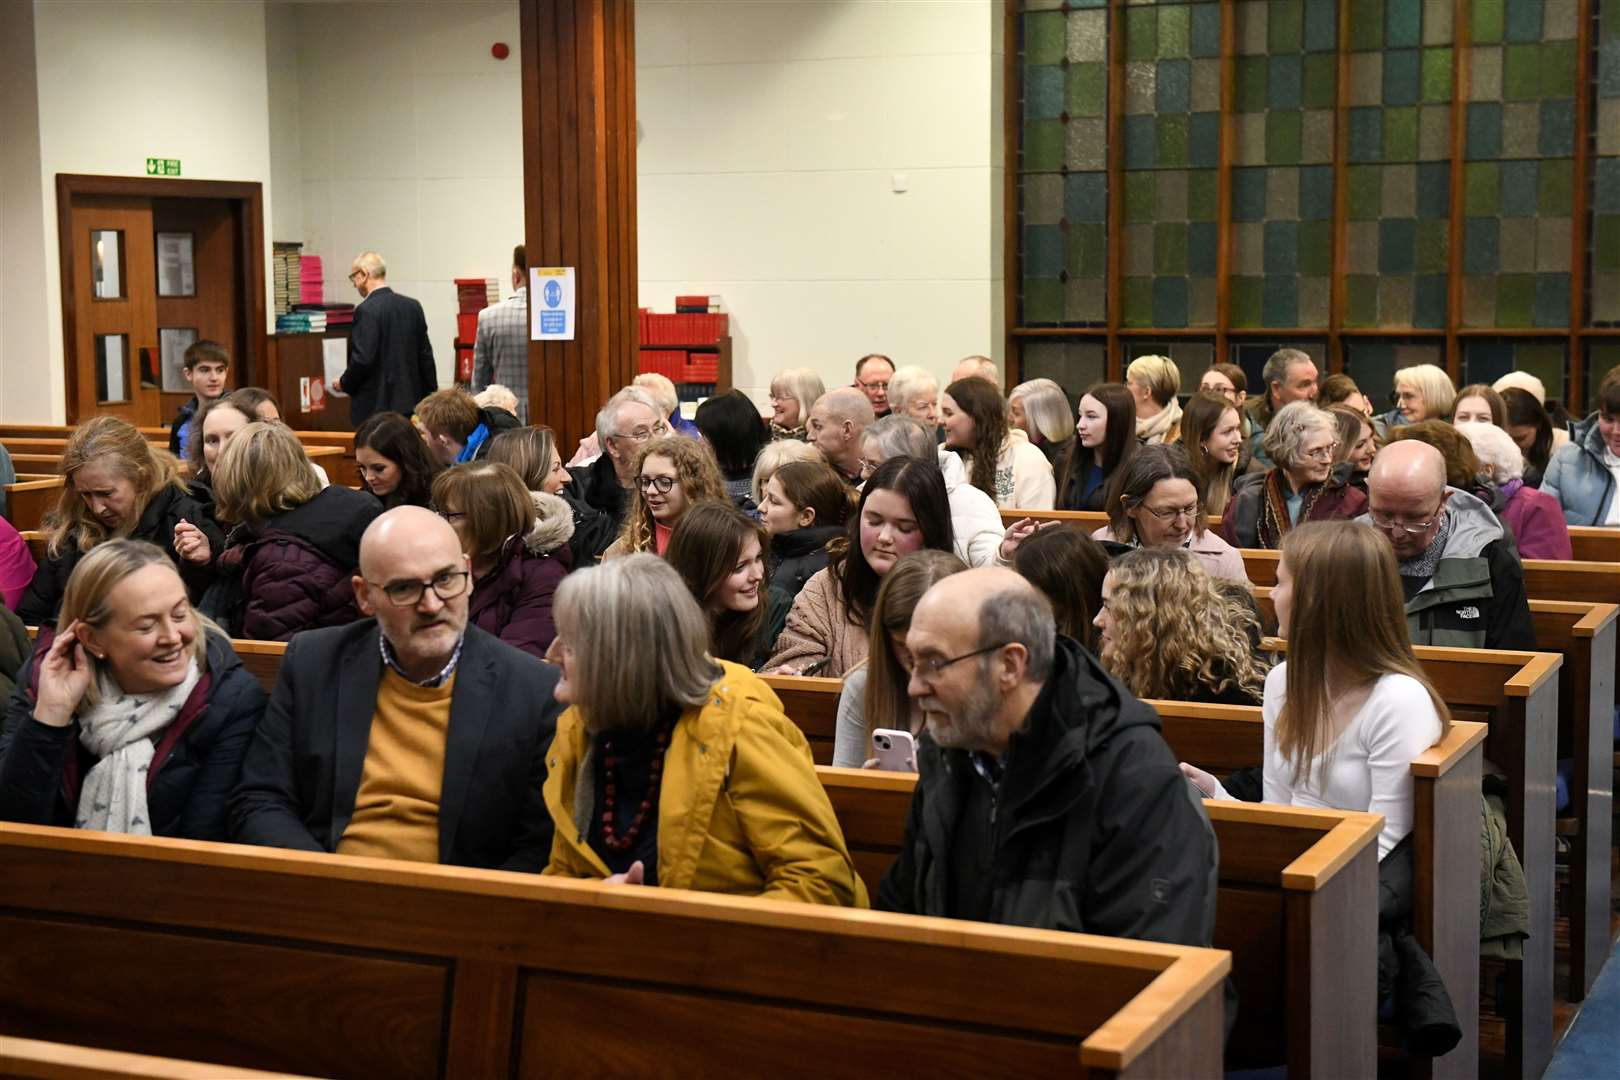 The audience at the concert at the Methodist Church.